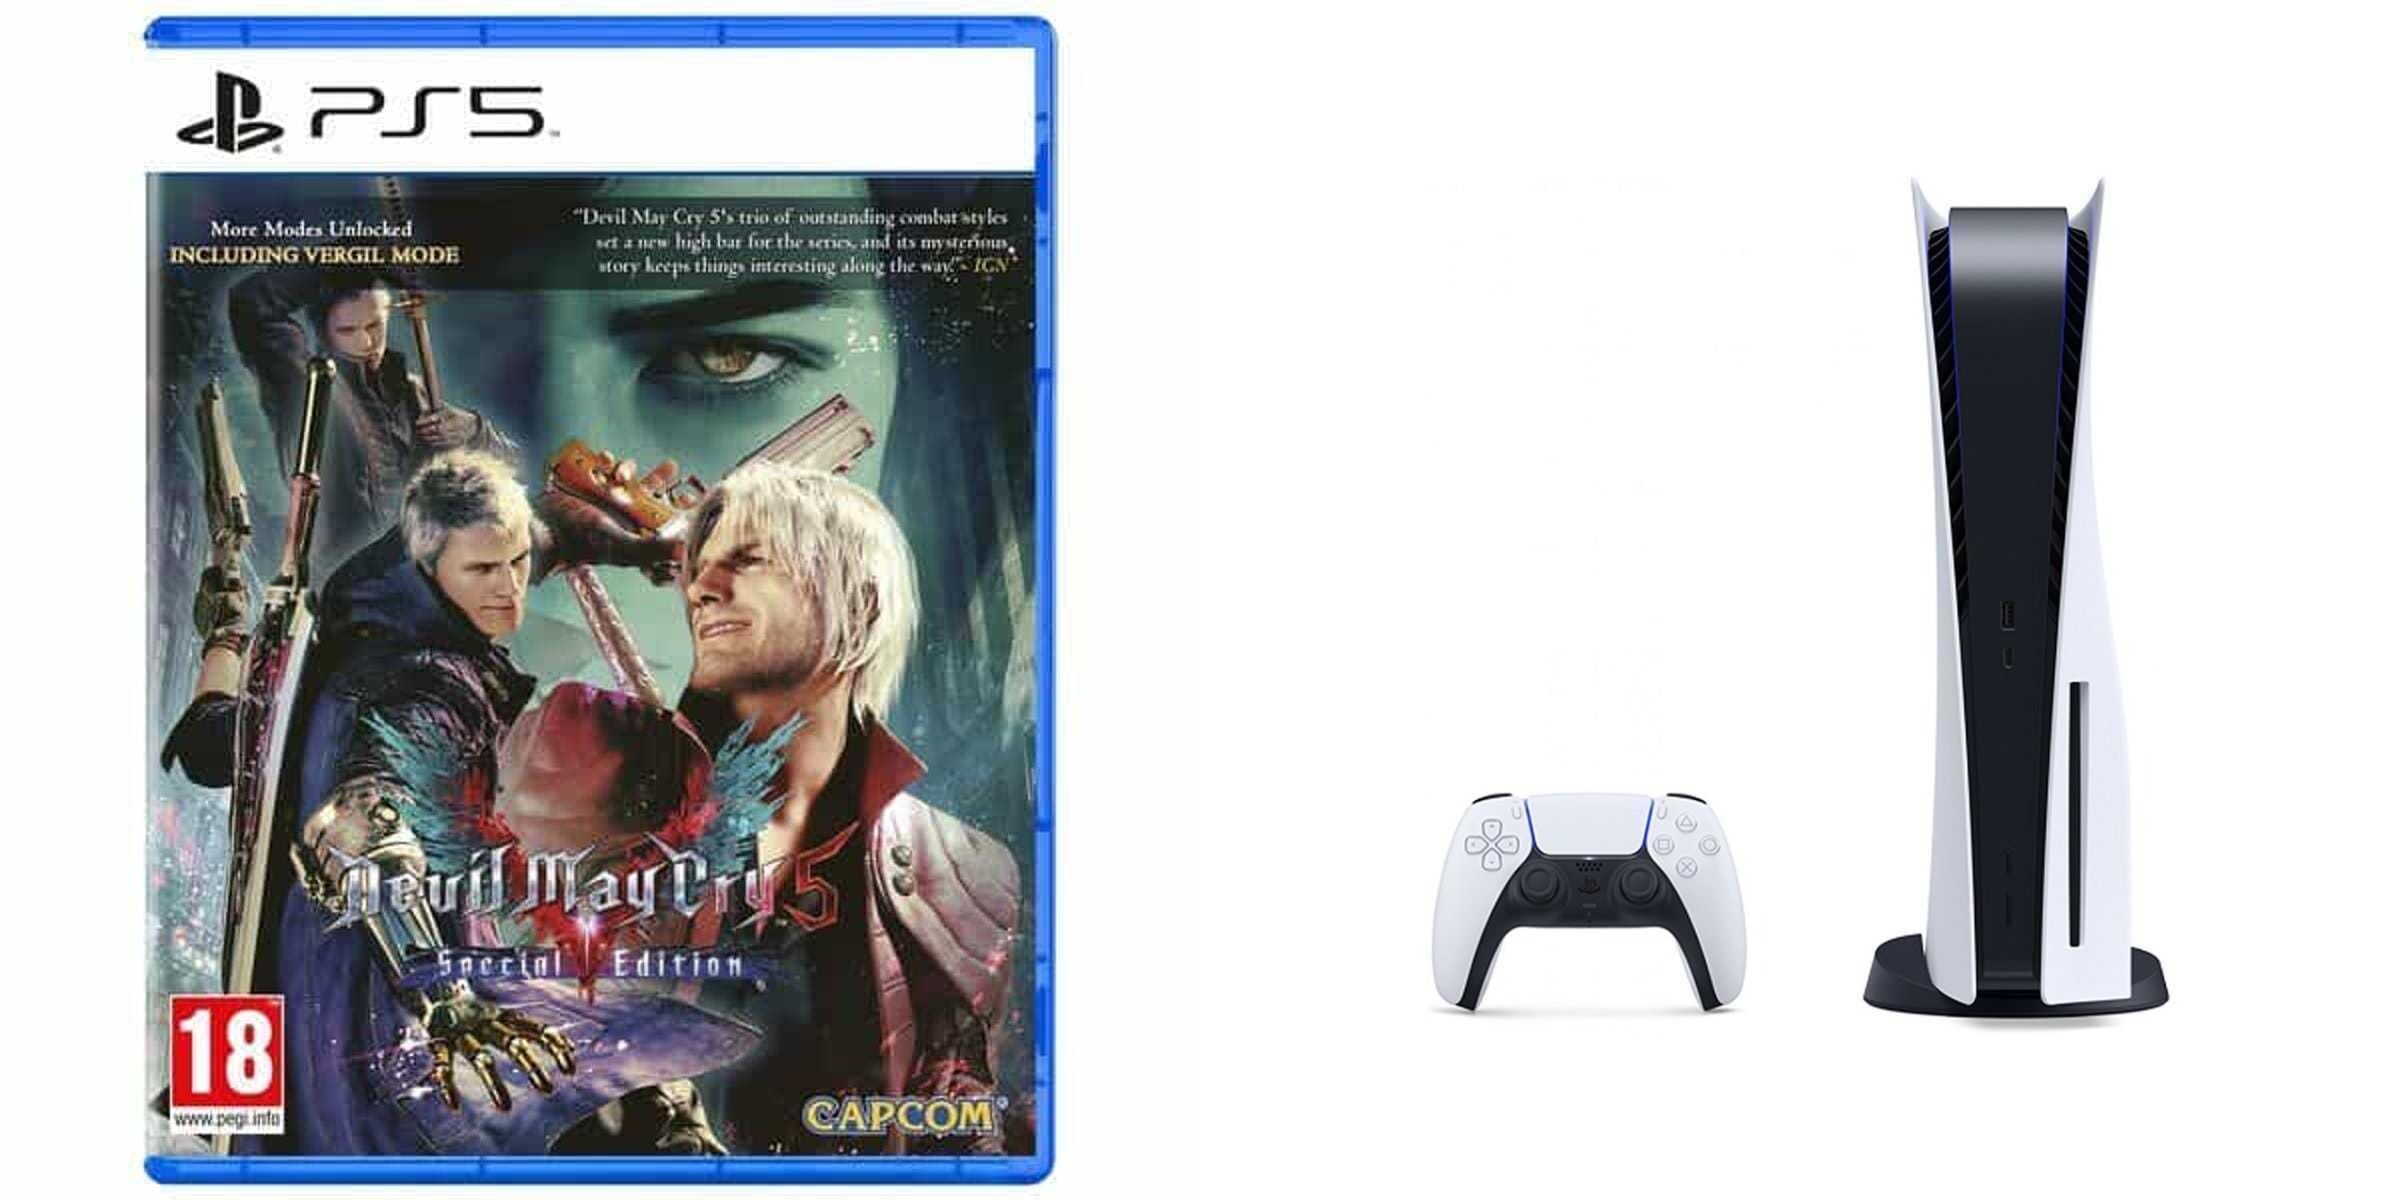 Sony PlayStation 5, 1 Wireless Controller, White - CFI-1016A01 MEE, with Devil May Cry 5 Special Edition for PlayStation 5